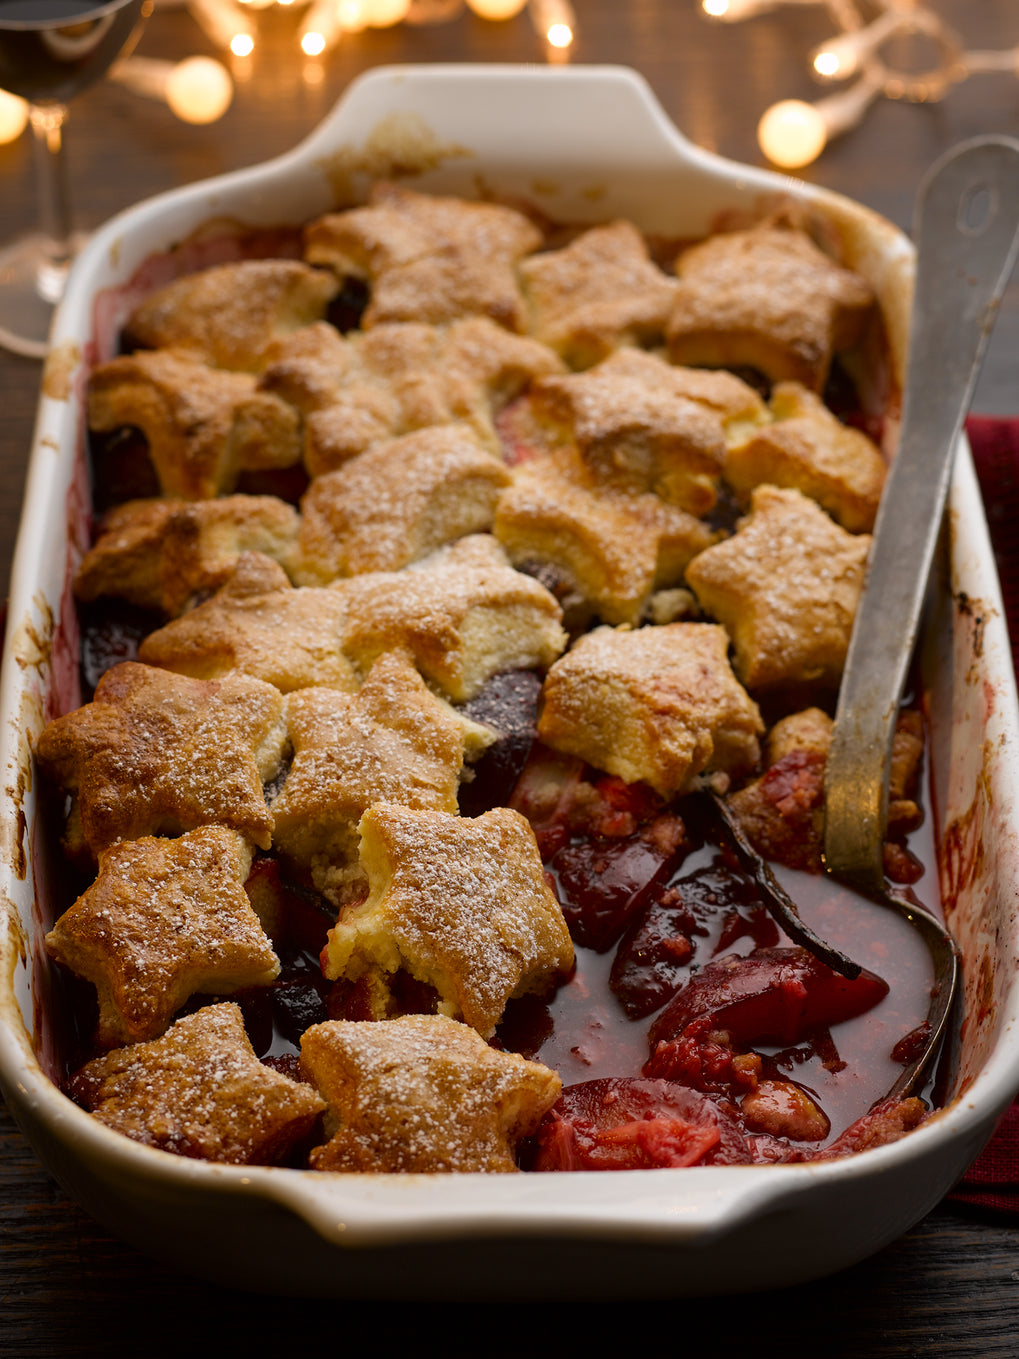 Plum and rhubarb cobbler with star anise & vanilla